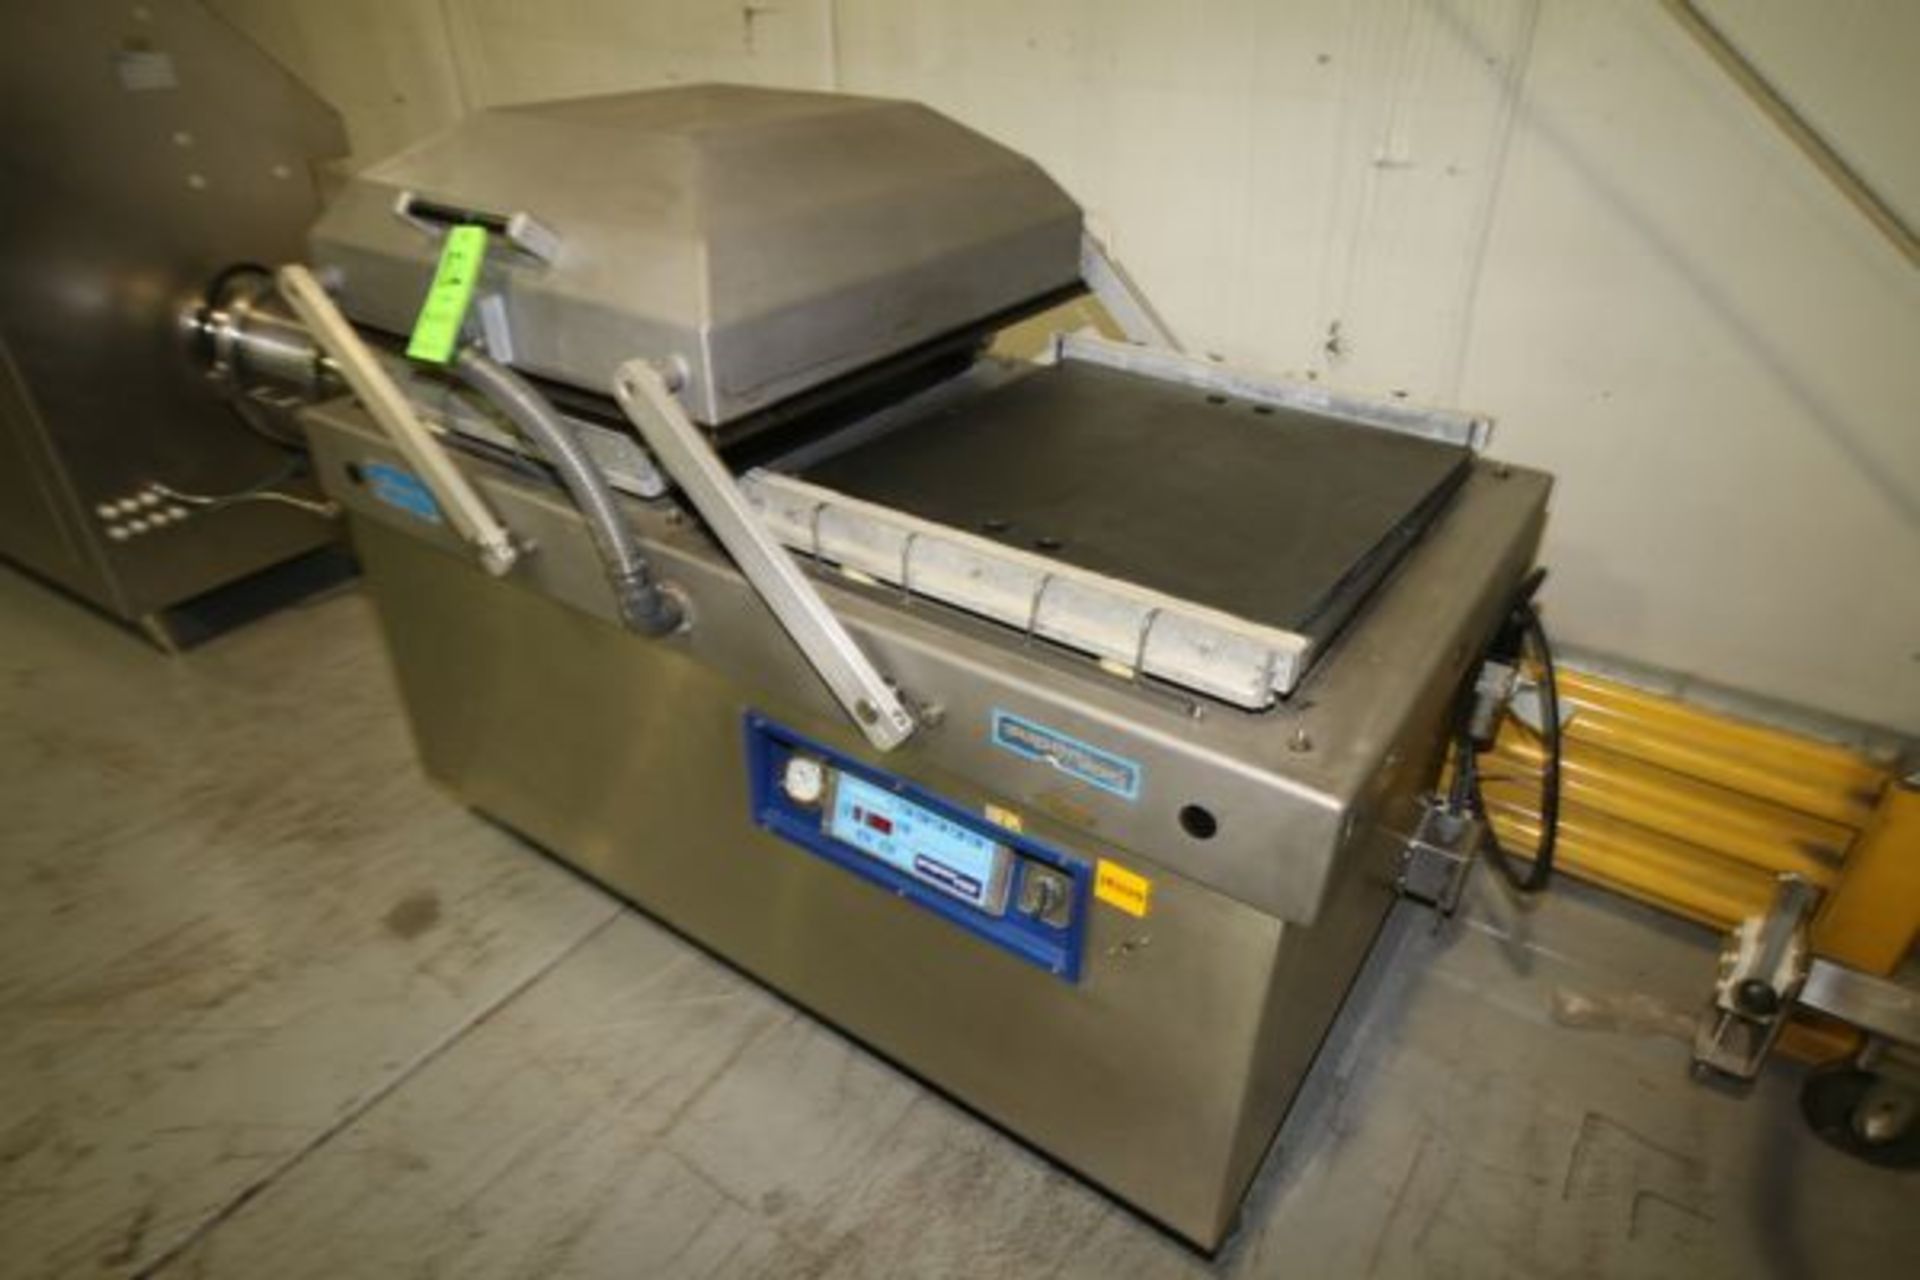 Smith SuperVac Dual Vacuum Sealer, Type GK290 with Seal Platform Dimension: Aprox. 24" x 24", 460 - Image 3 of 3